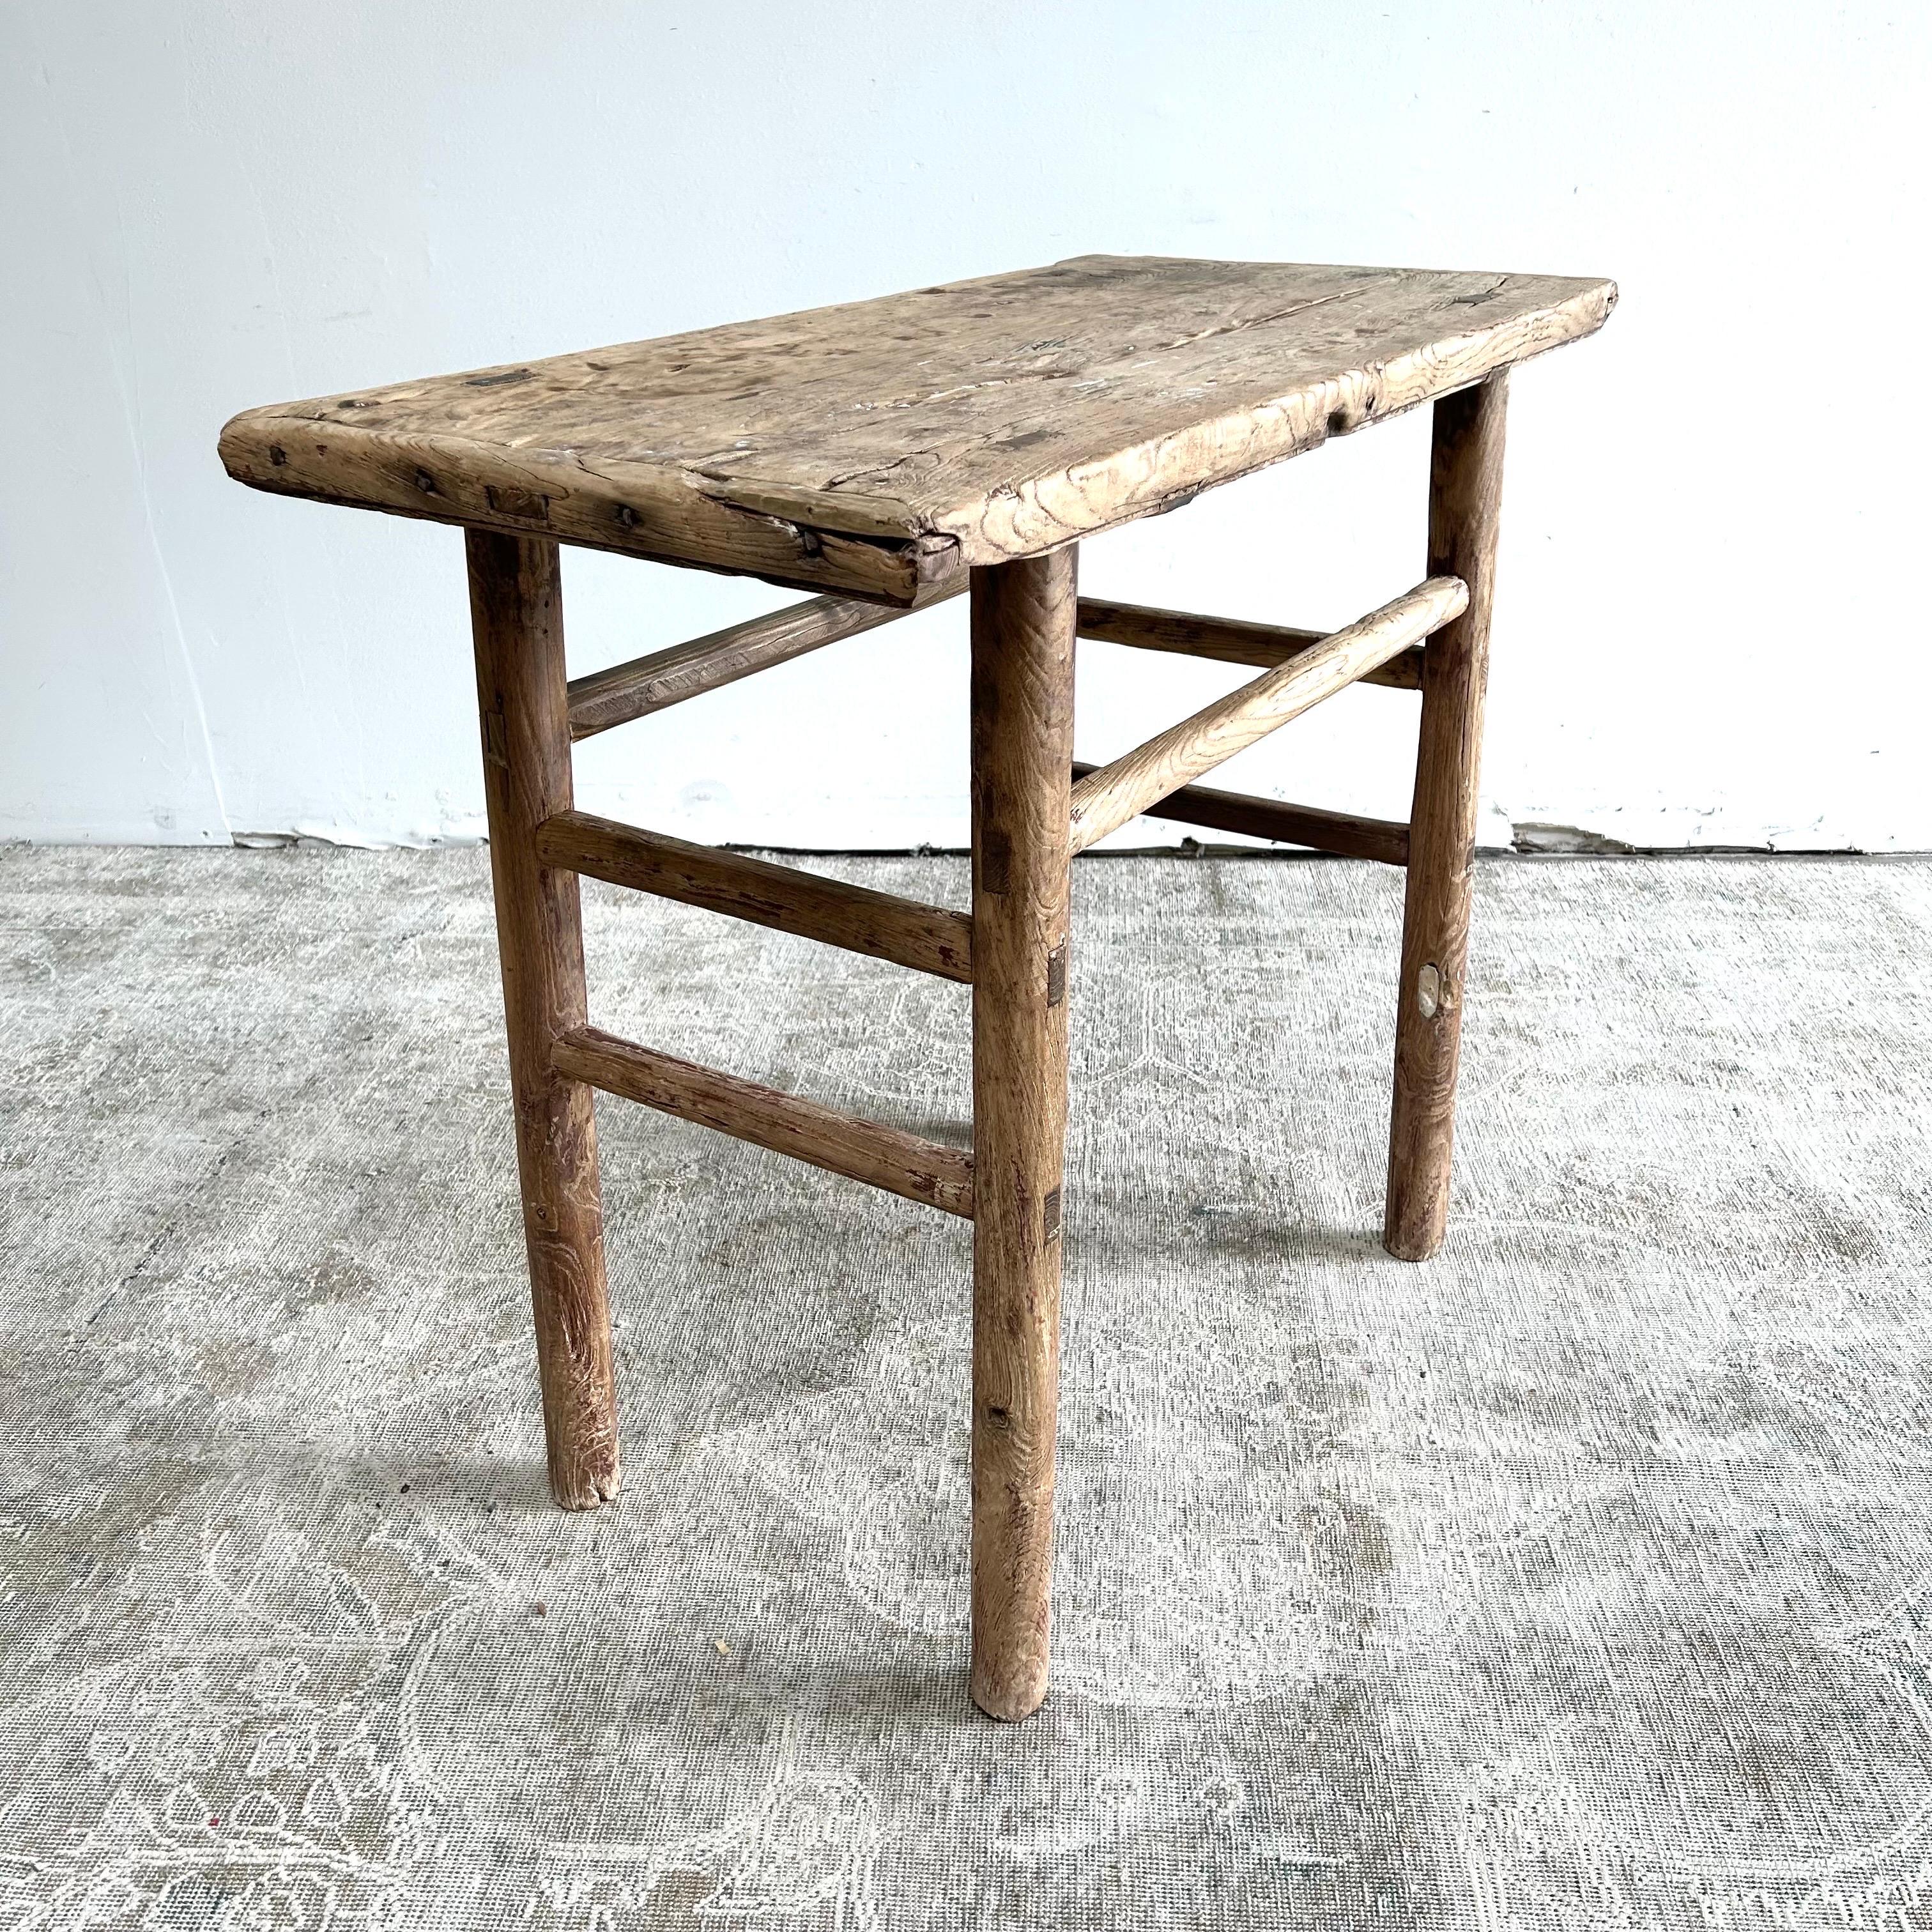 Elm console 38” W x 19” D x 33” H
Vintage antique elm wood console table Made from Vintage reclaimed elm wood. Beautiful antique patina, with weathering and age, these are solid and sturdy ready for daily use, use as an entry table, sofa table or